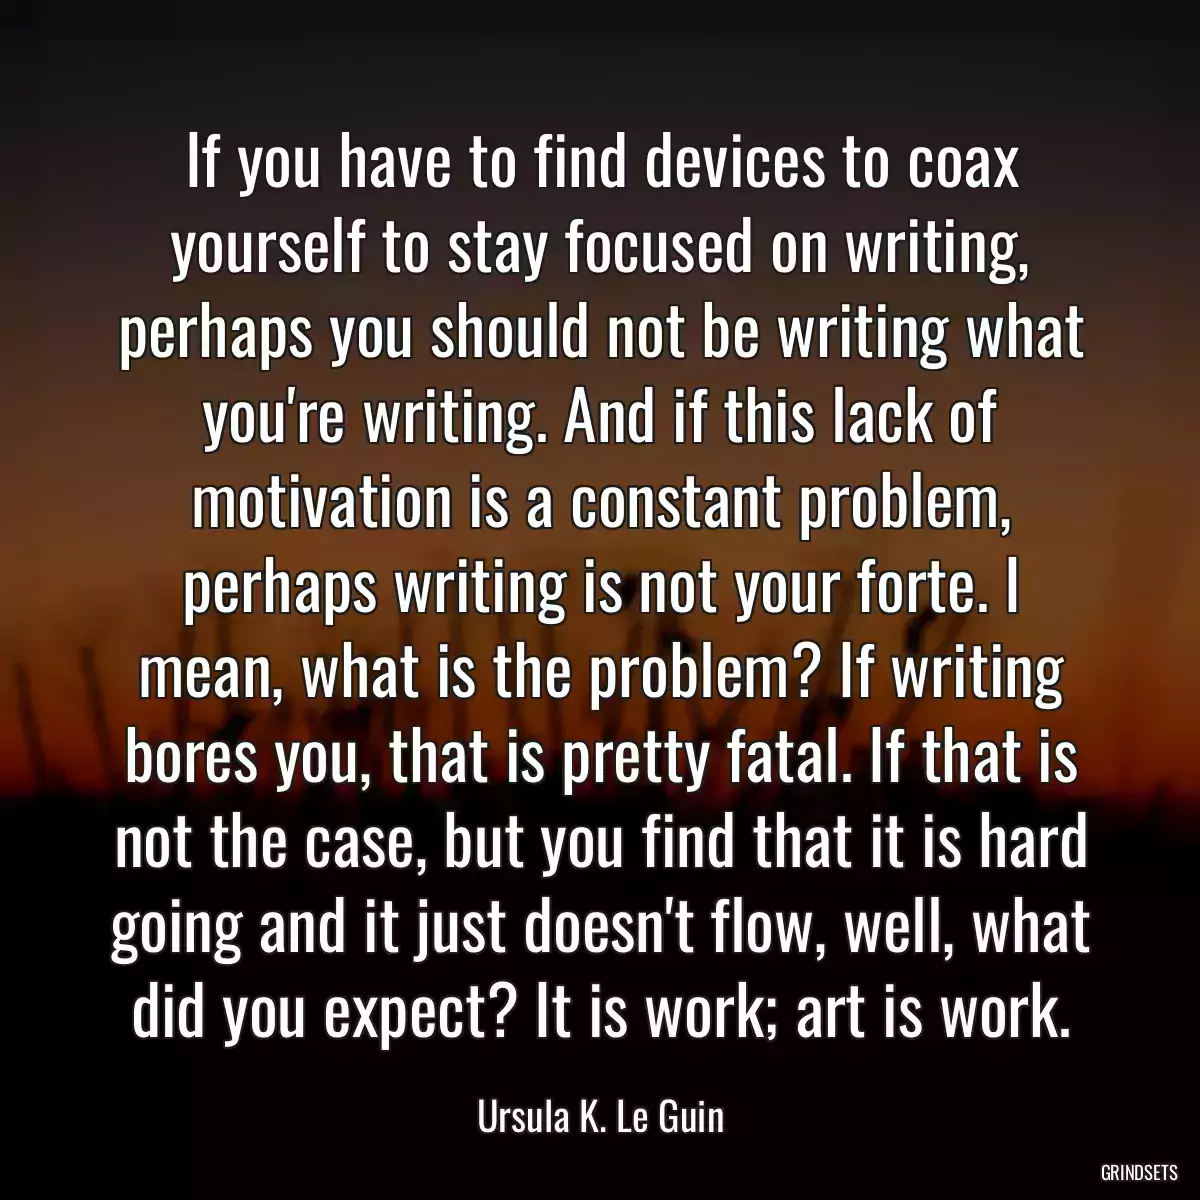 If you have to find devices to coax yourself to stay focused on writing, perhaps you should not be writing what you\'re writing. And if this lack of motivation is a constant problem, perhaps writing is not your forte. I mean, what is the problem? If writing bores you, that is pretty fatal. If that is not the case, but you find that it is hard going and it just doesn\'t flow, well, what did you expect? It is work; art is work.